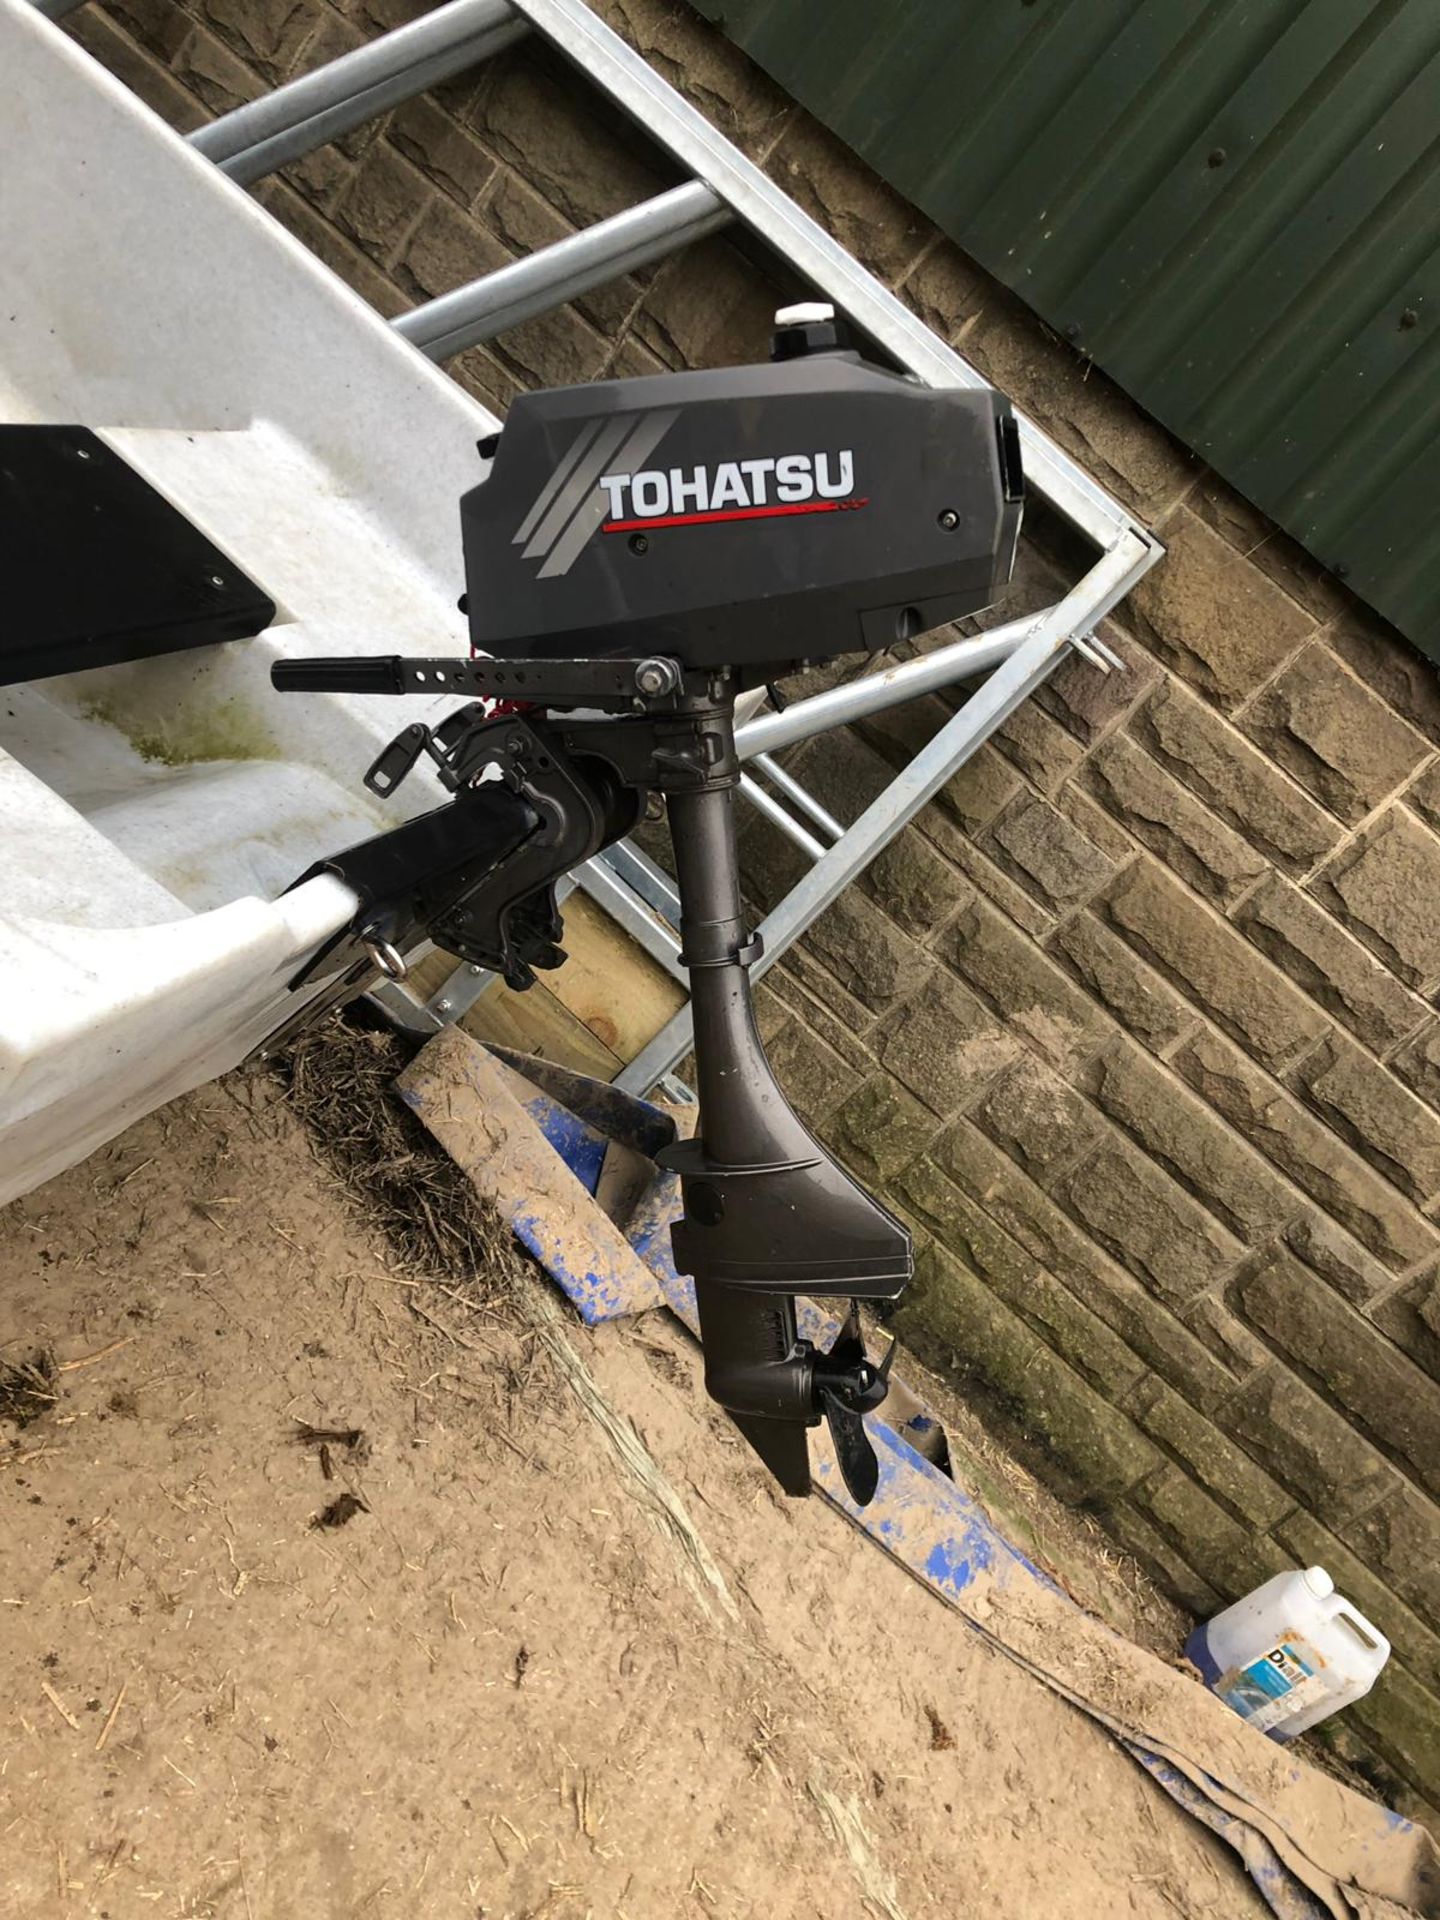 PIONER 12 BOAT WITH TOHATSU OUTBOARD MOTOR IDEAL FOR ANGLERS ON LOCHS, LAKES, RIVERS ETC *PLUS VAT* - Image 4 of 15